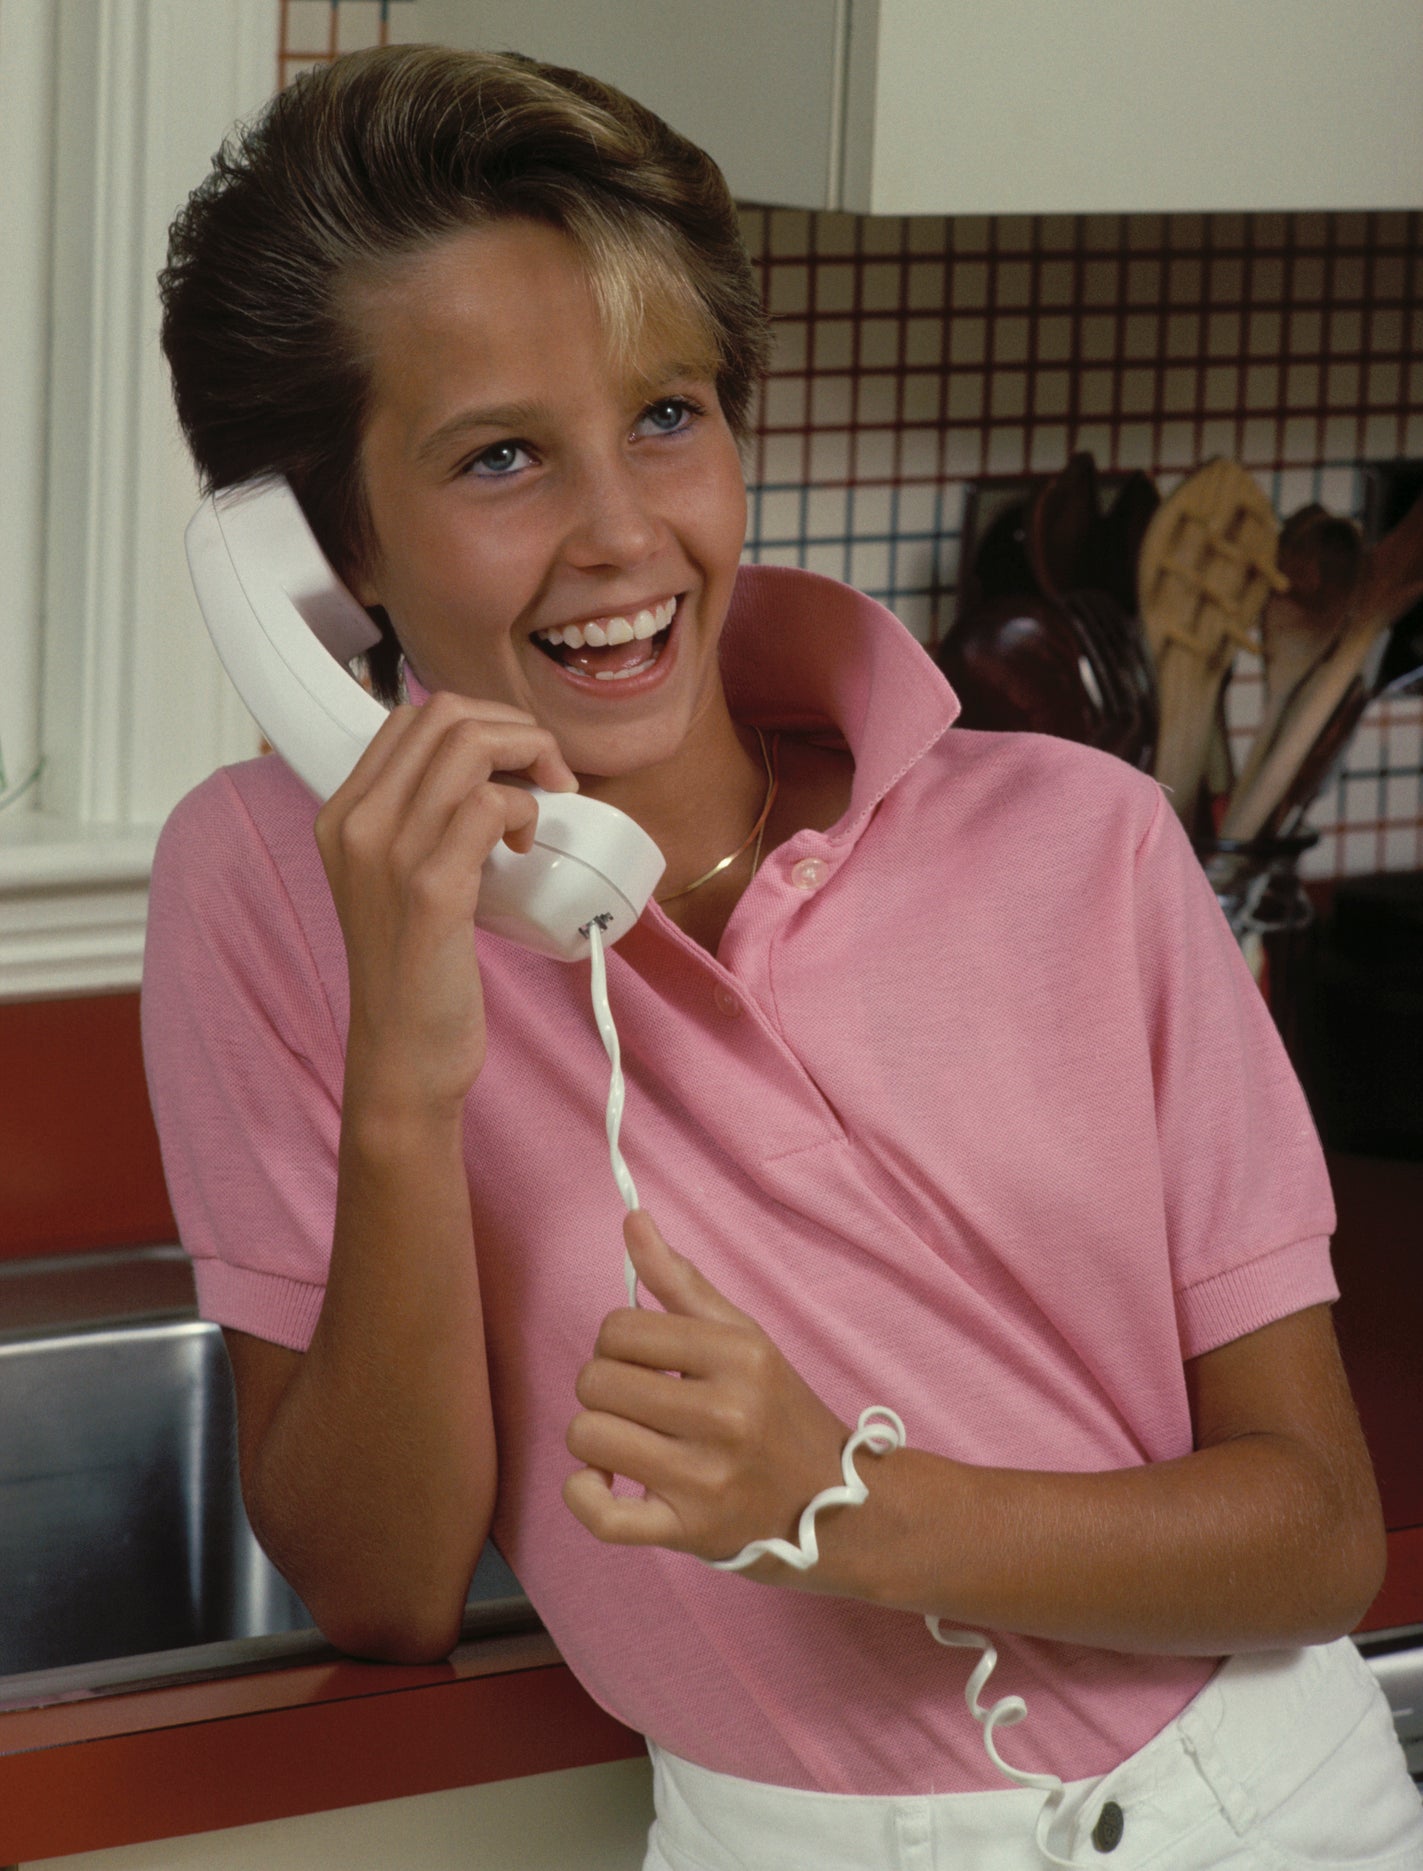 A young boy talking on the phone